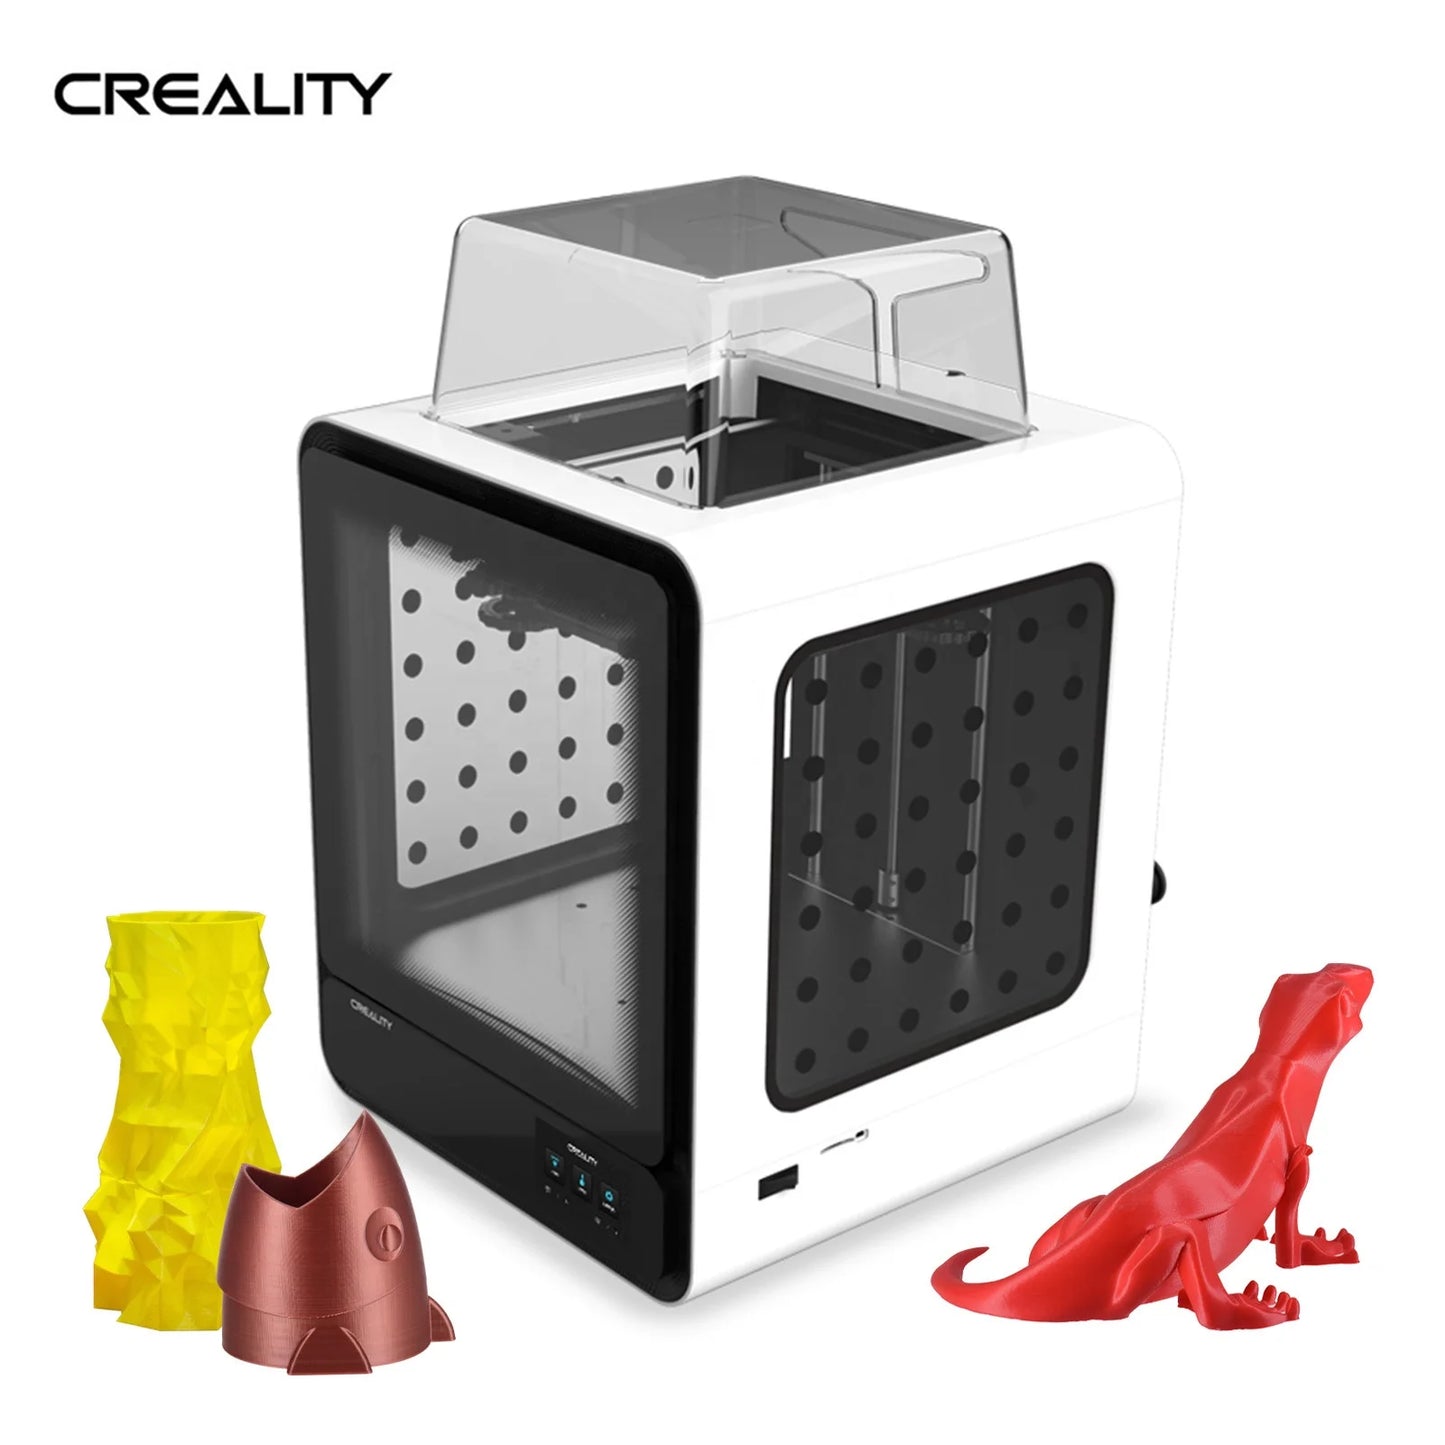 Creality CR-200B Large Size Color Touch Screen industrial grade 3d printer machine 200*200*200mm